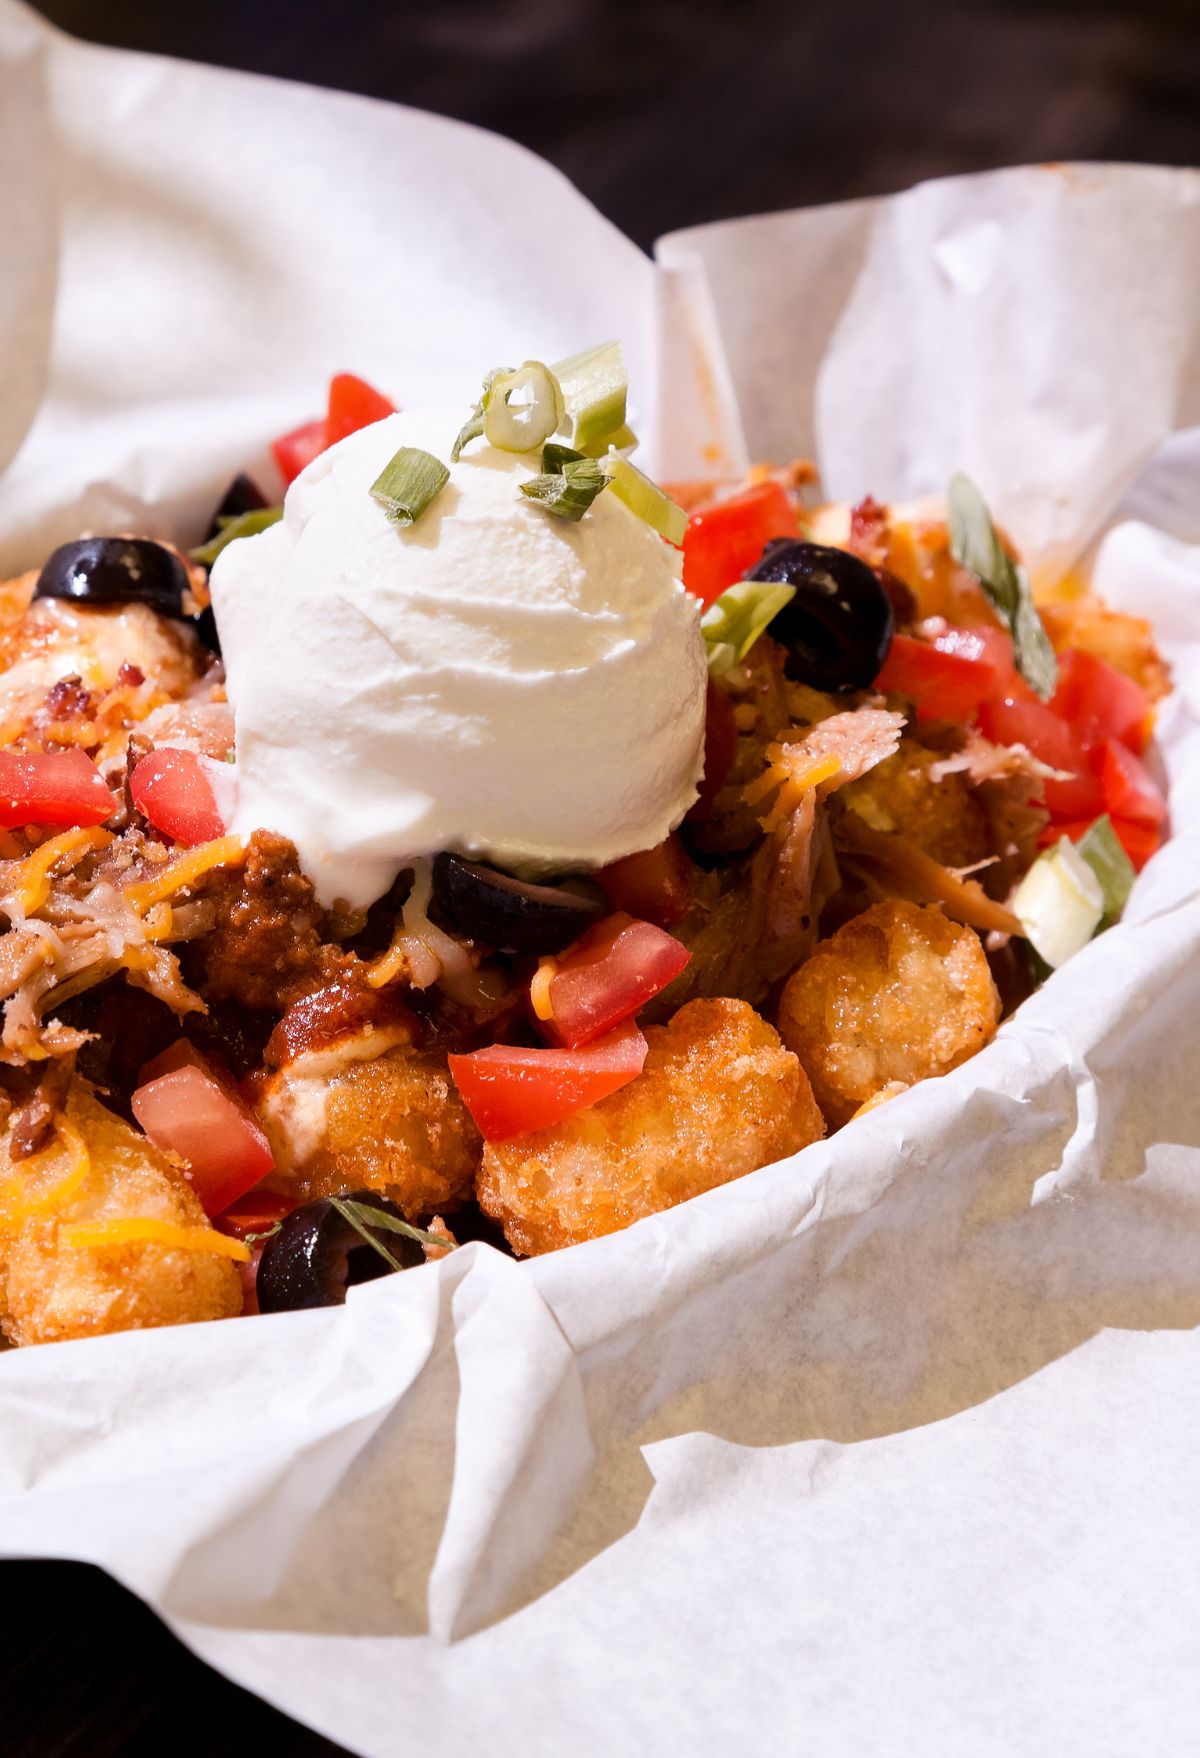 A serving of loaded tater tots topped with ground beef, diced tomatoes, black olives, green onions, and a dollop of sour cream.